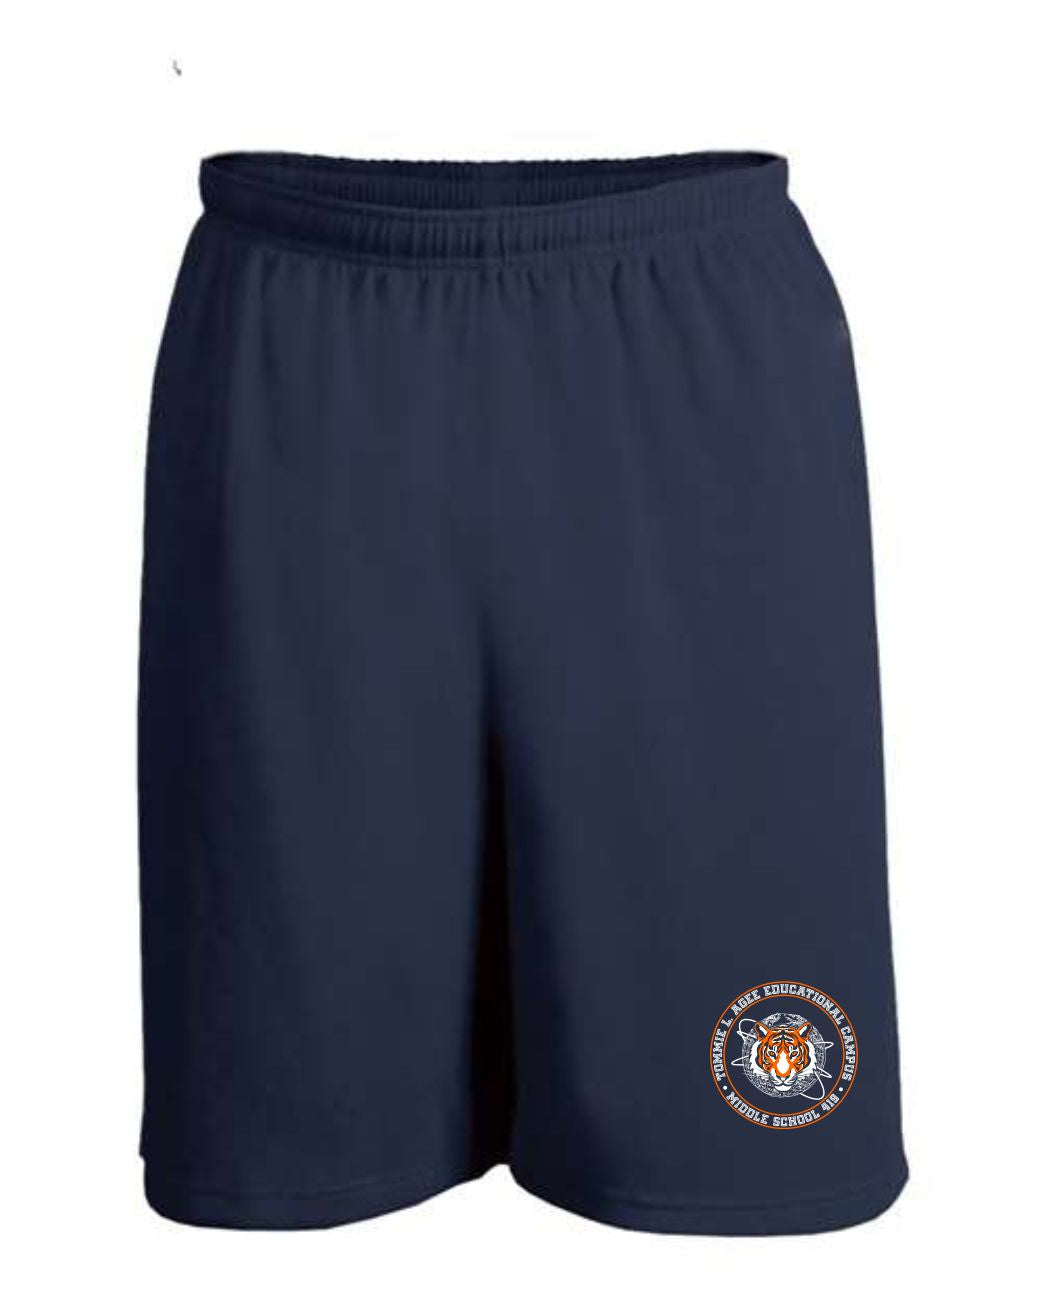 MS419-The Tommie L. Agee Ed. Campus - Mesh Navy Short